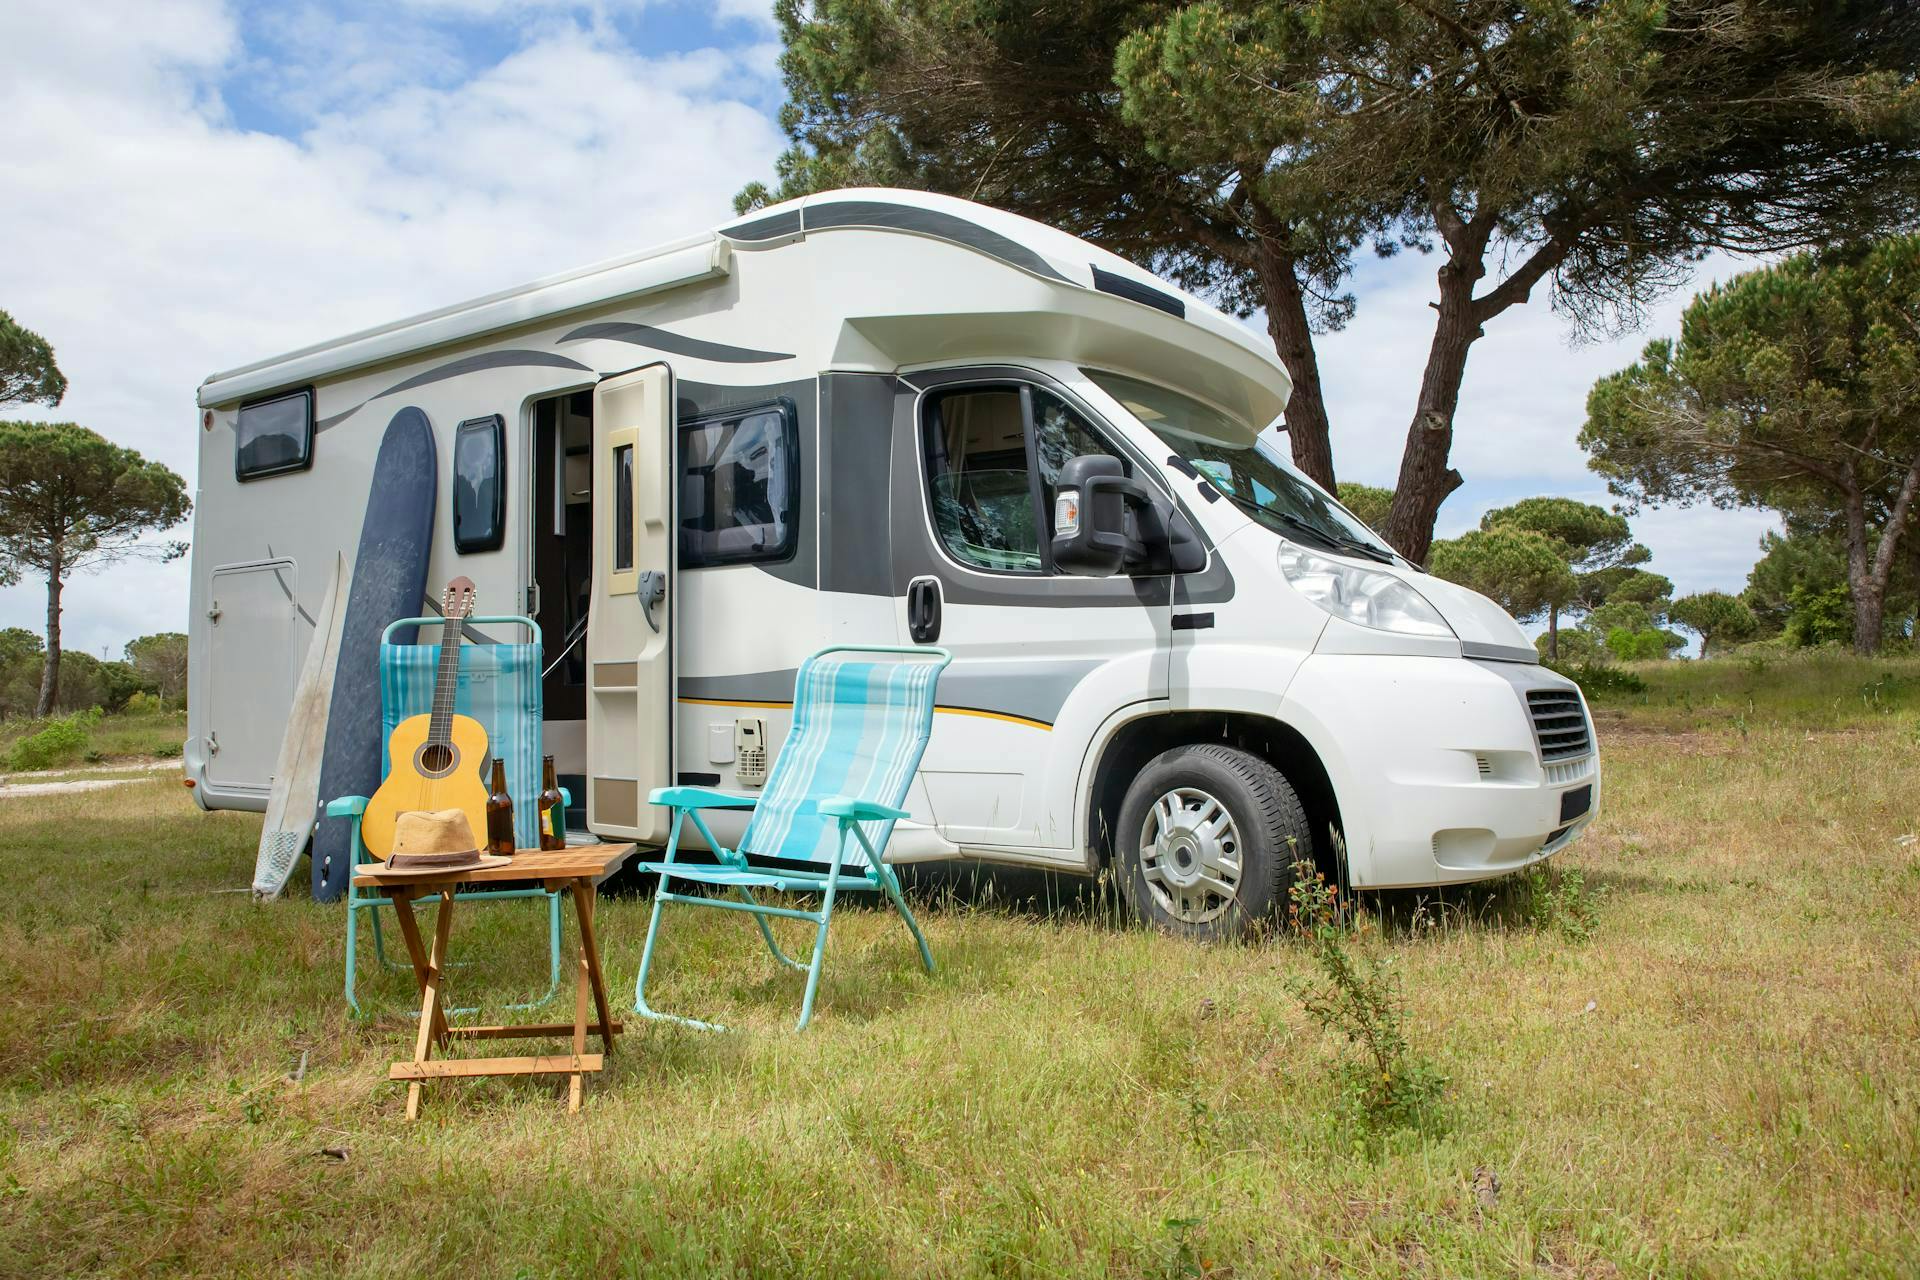 Are Airbnb RV Rentals Profitable? A Guide to Airbnb RV Rental Profitability